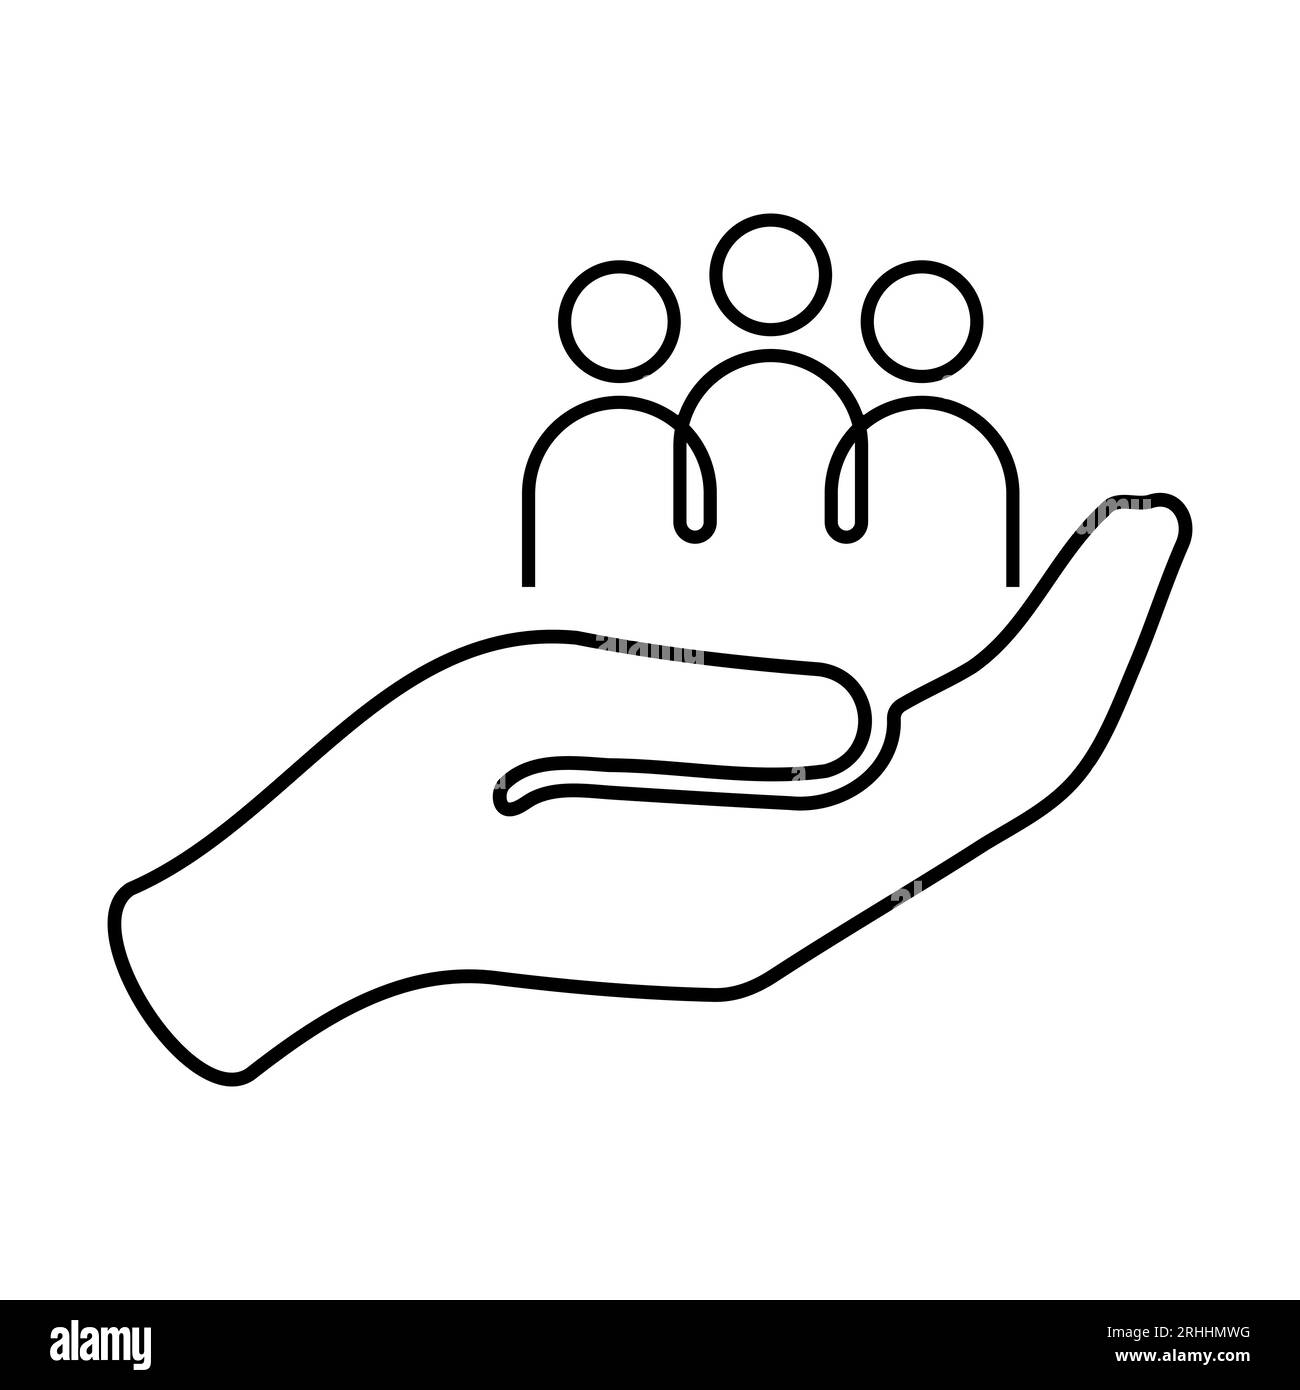 Inclusion social equity line icon. Design can use for web and mobile app Stock Vector